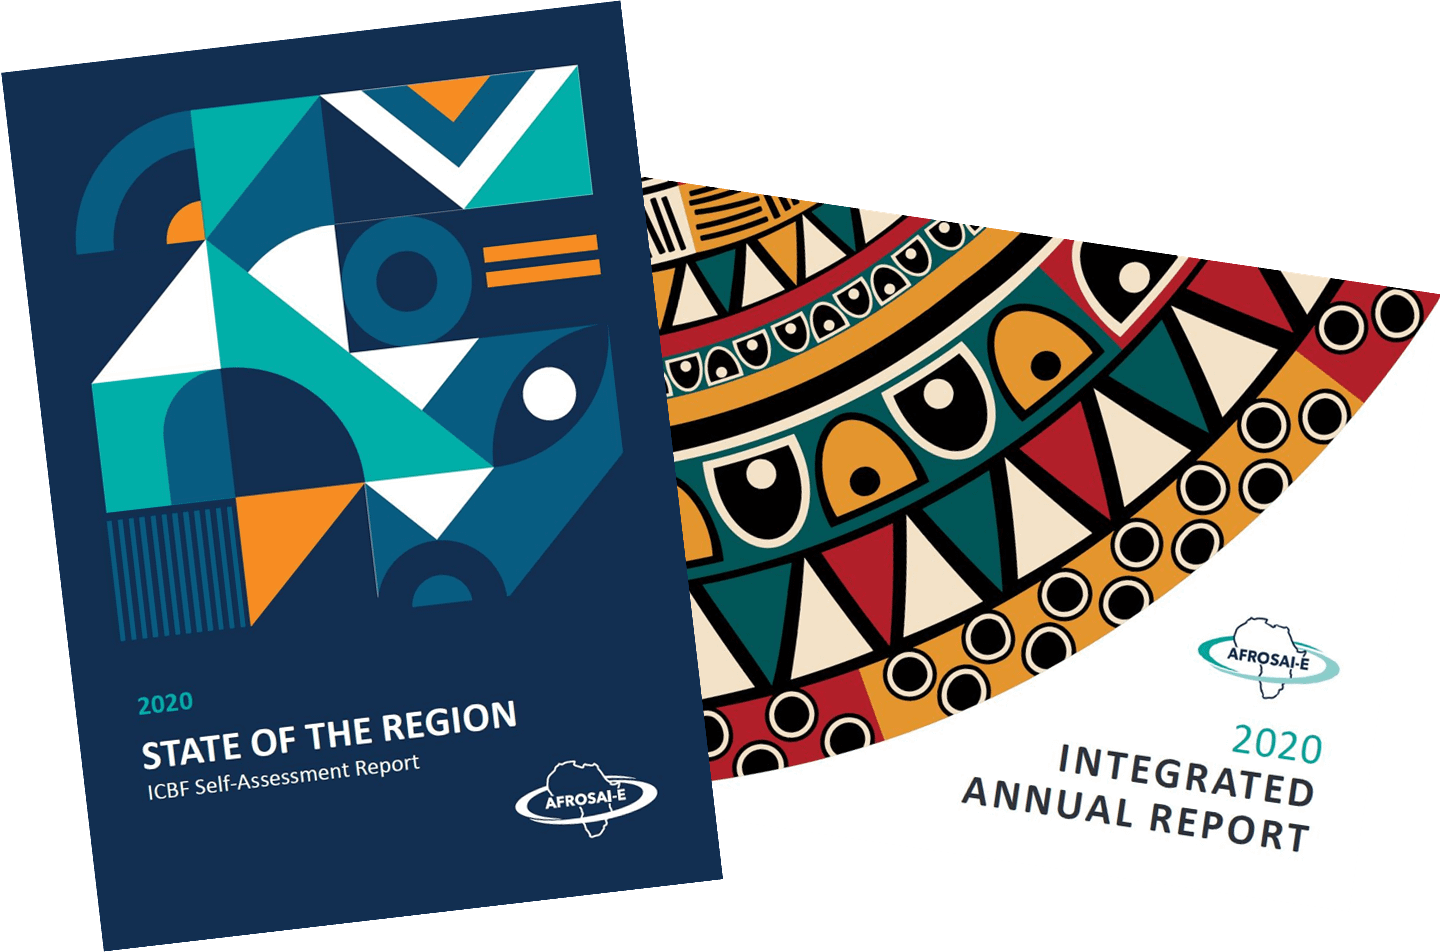 Annual Report Covers 2020